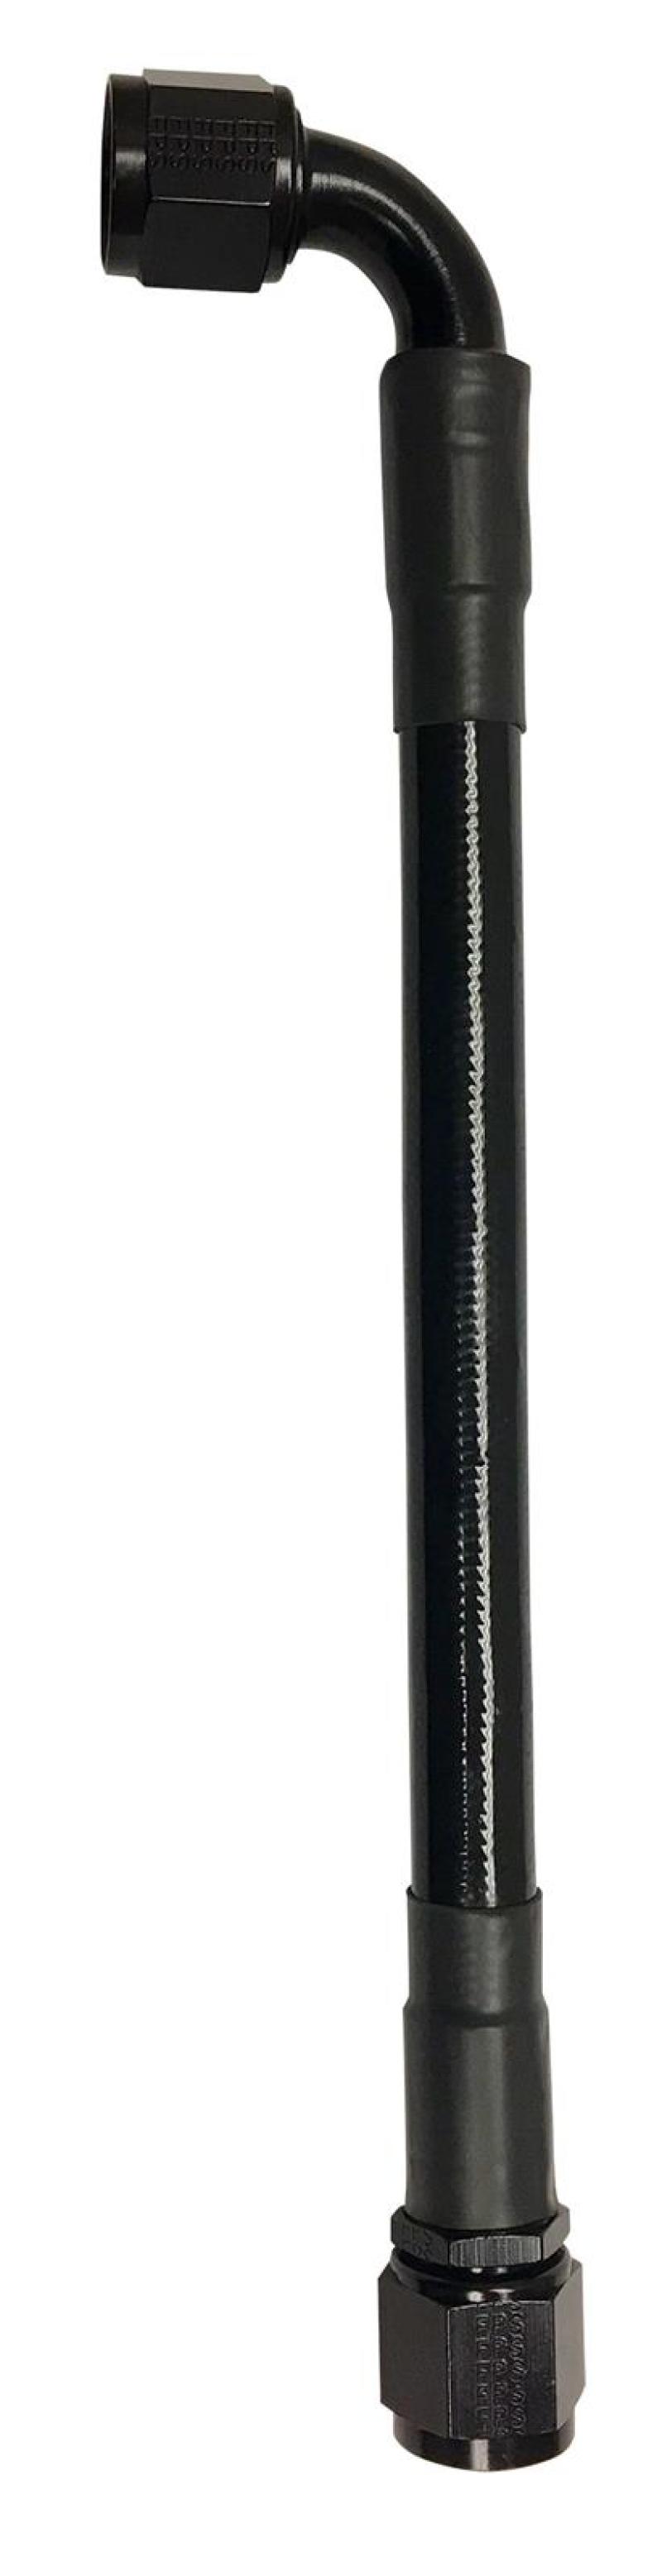 Fragola -8AN Ext Black PTFE Hose Assembly Straight x 90 Degree 60in - 6028-1-2-60BL